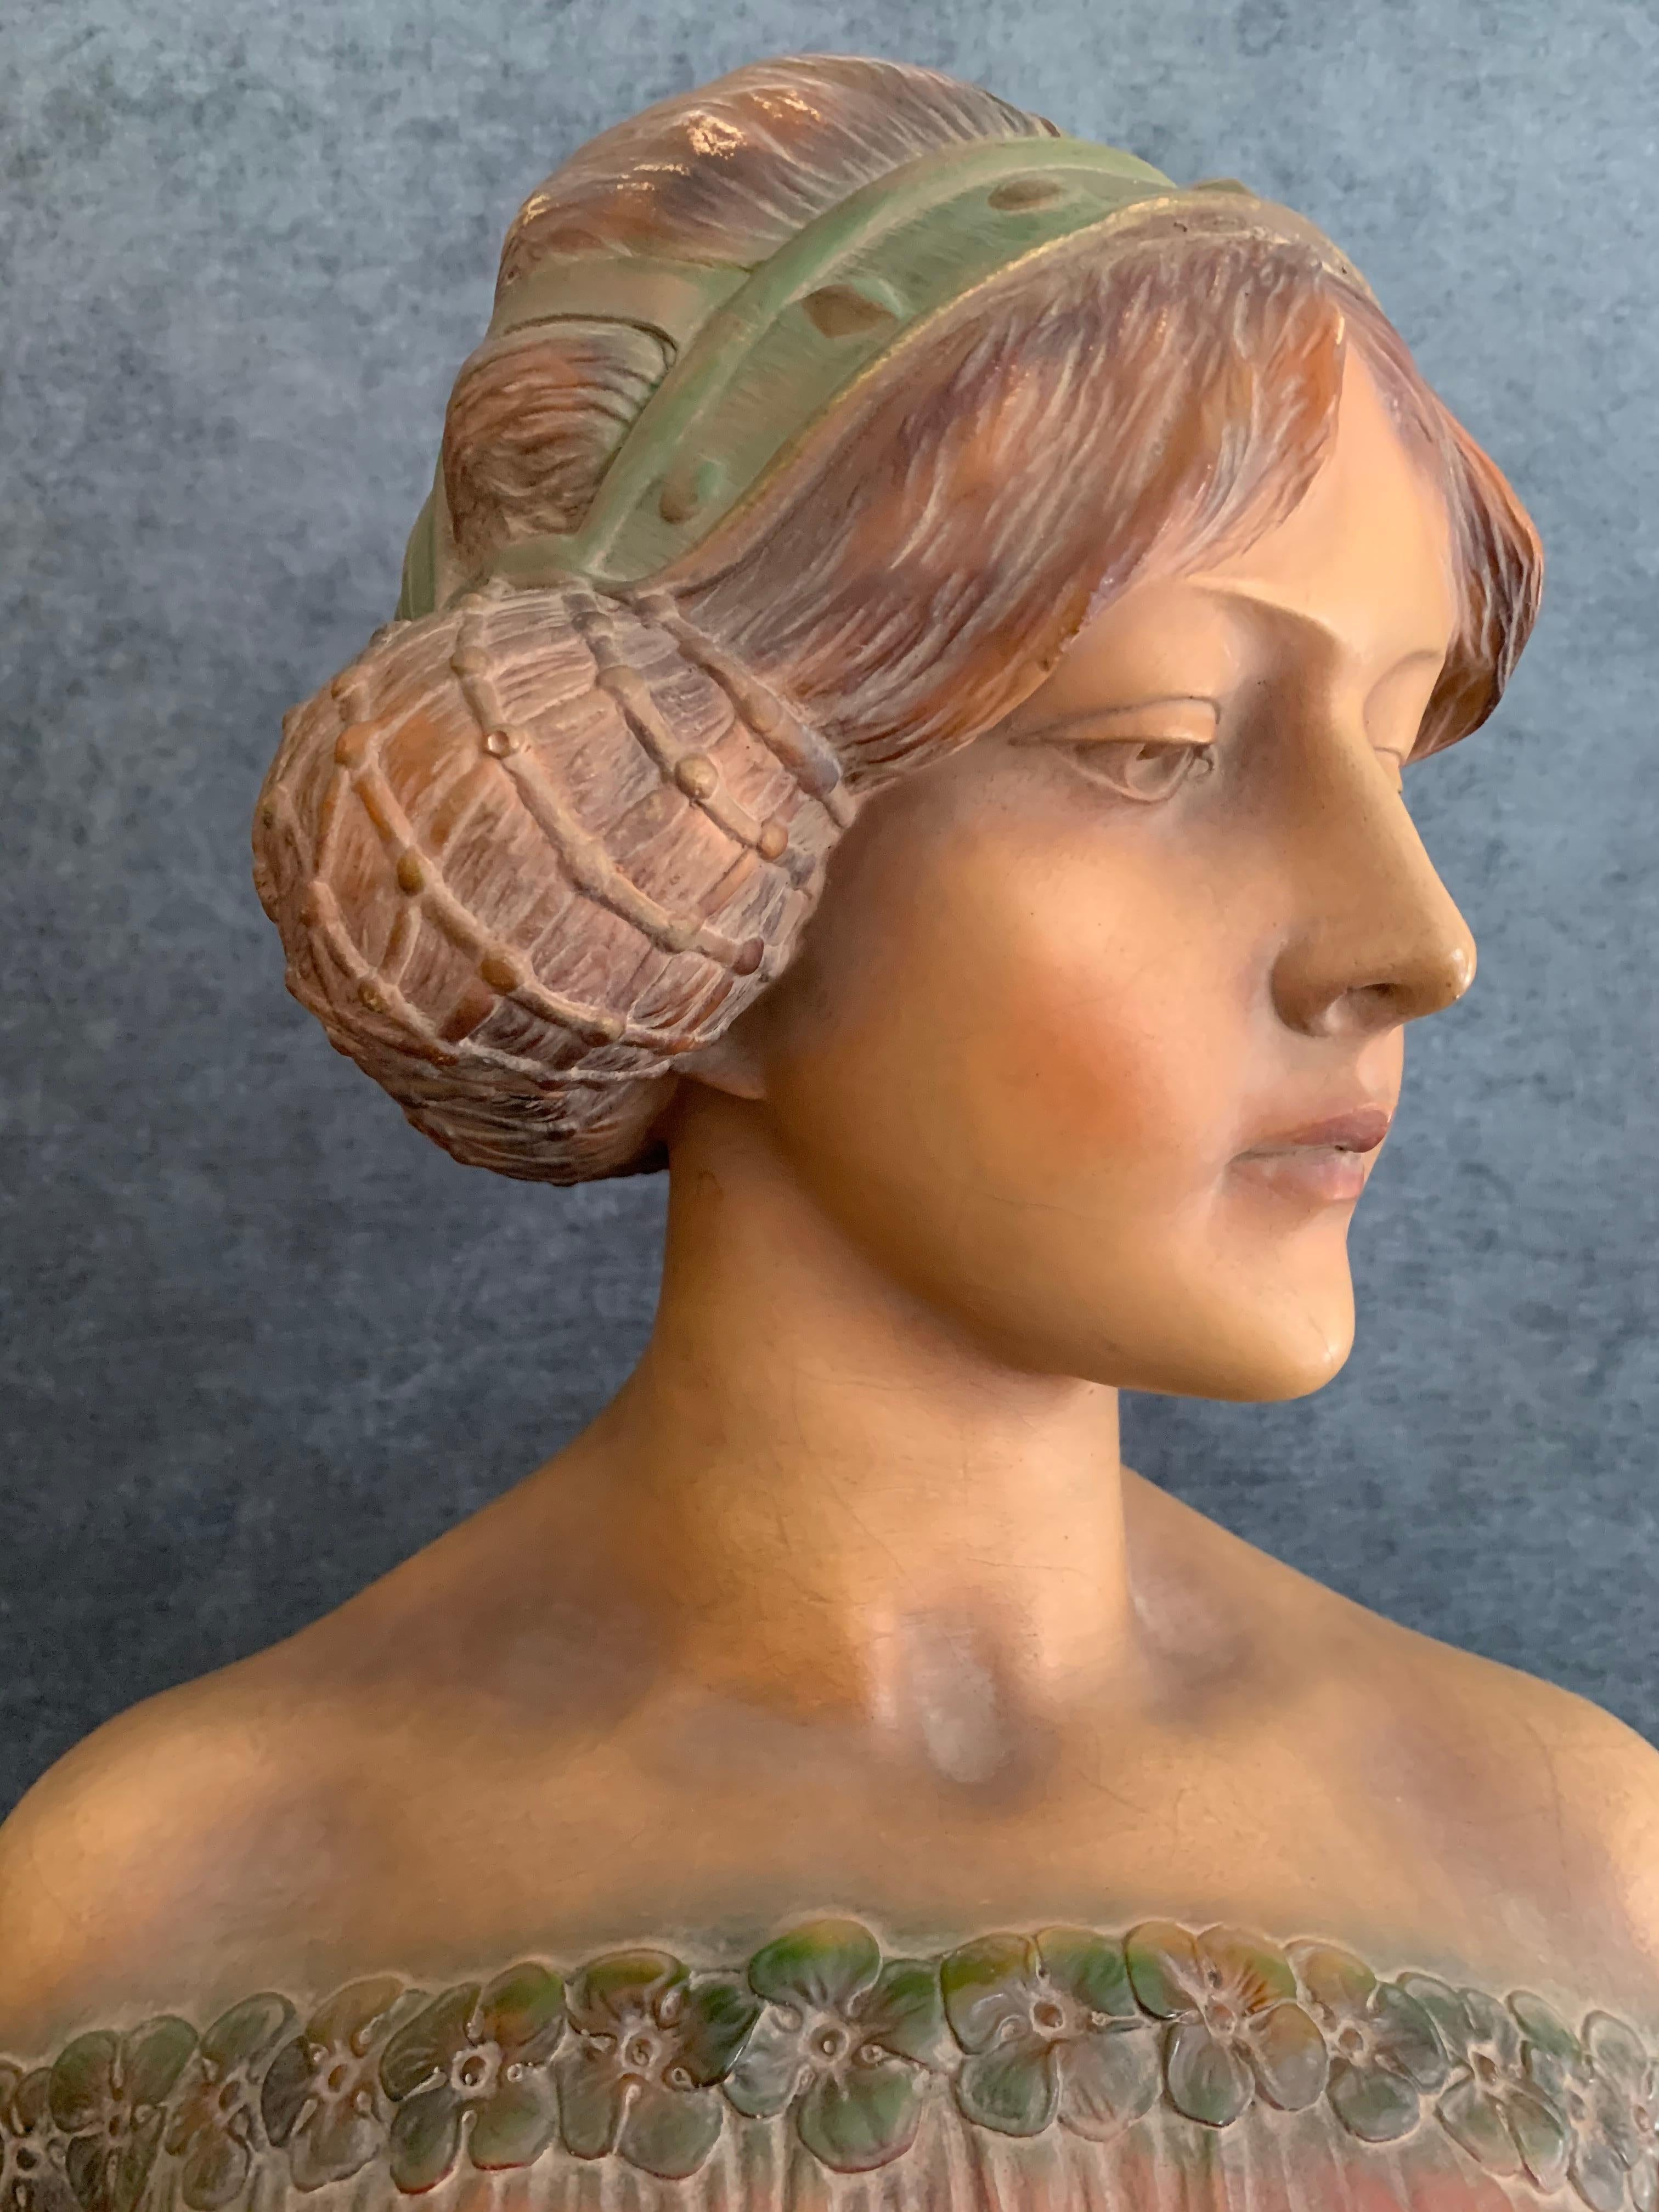 Eunice by Simon Monteneve, Art Nouveau

Height: 21 inches / 51 cm
Art Nouveau bust of Eunice by Simon Monteneve, probably commissioned for Goldscheider in Paris who did produce it in limited numbers in the early 20th century, probably around